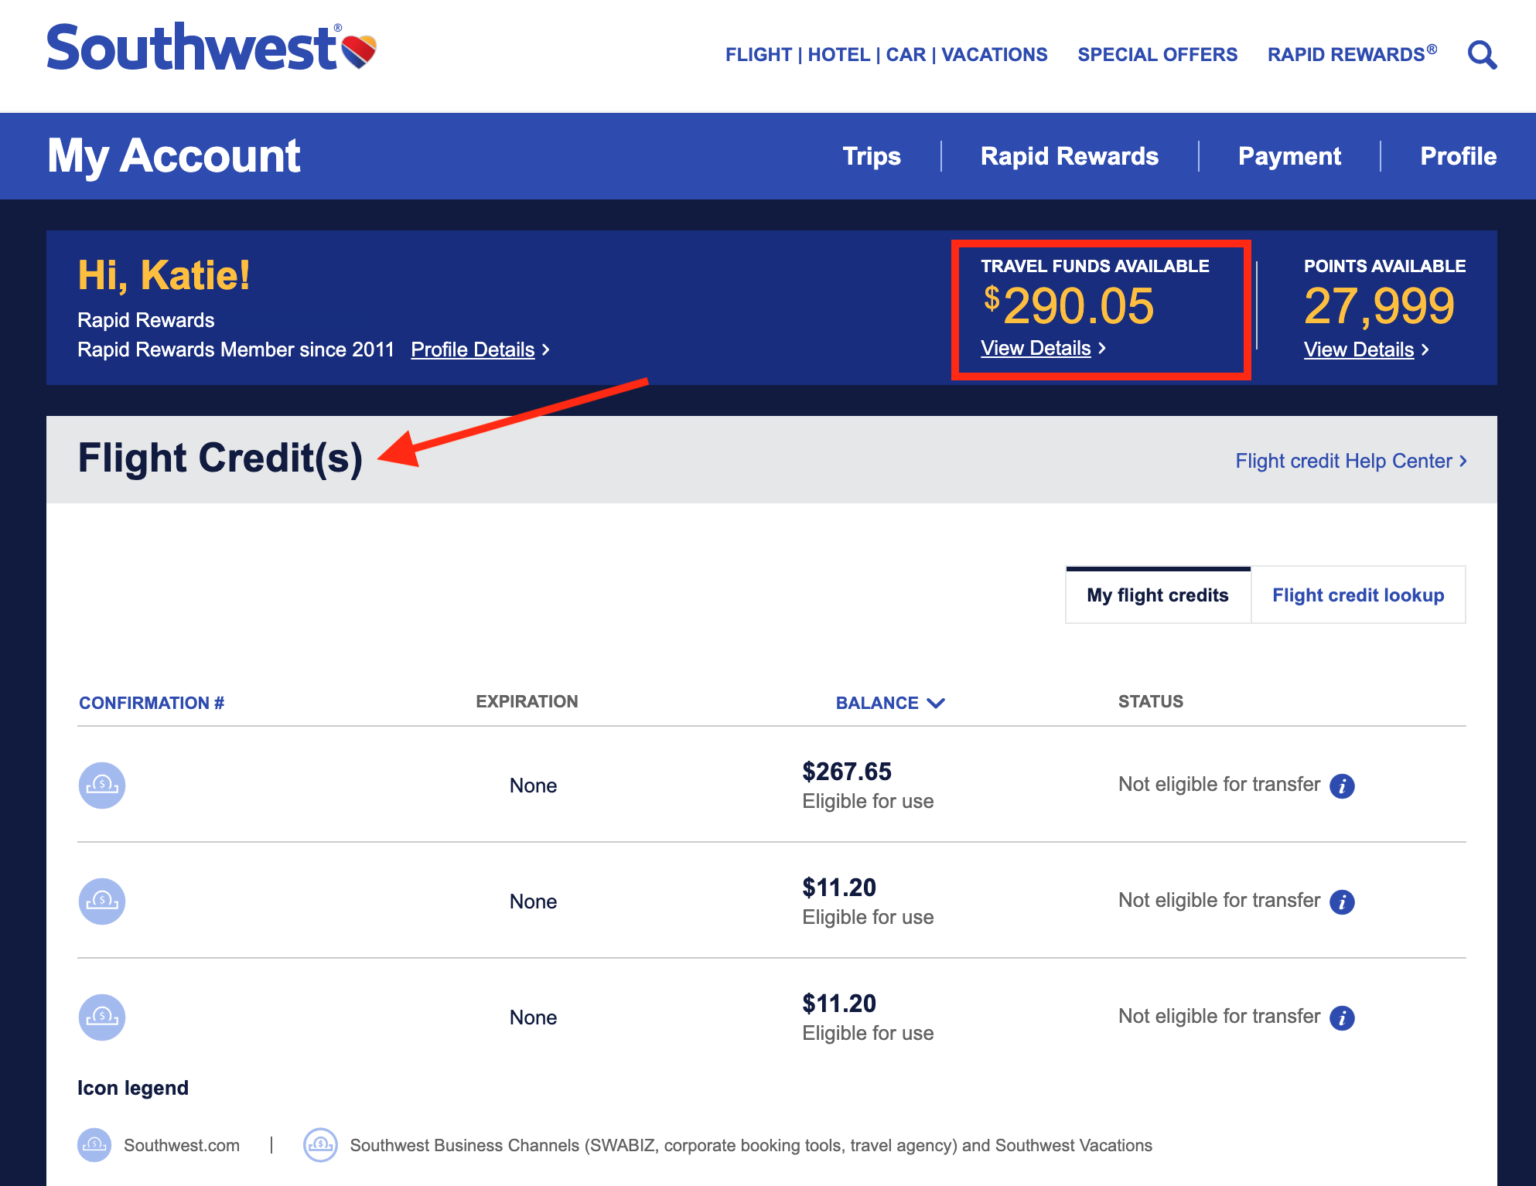 How to Cancel a Southwest Airlines Flight Points or Cash Tickets